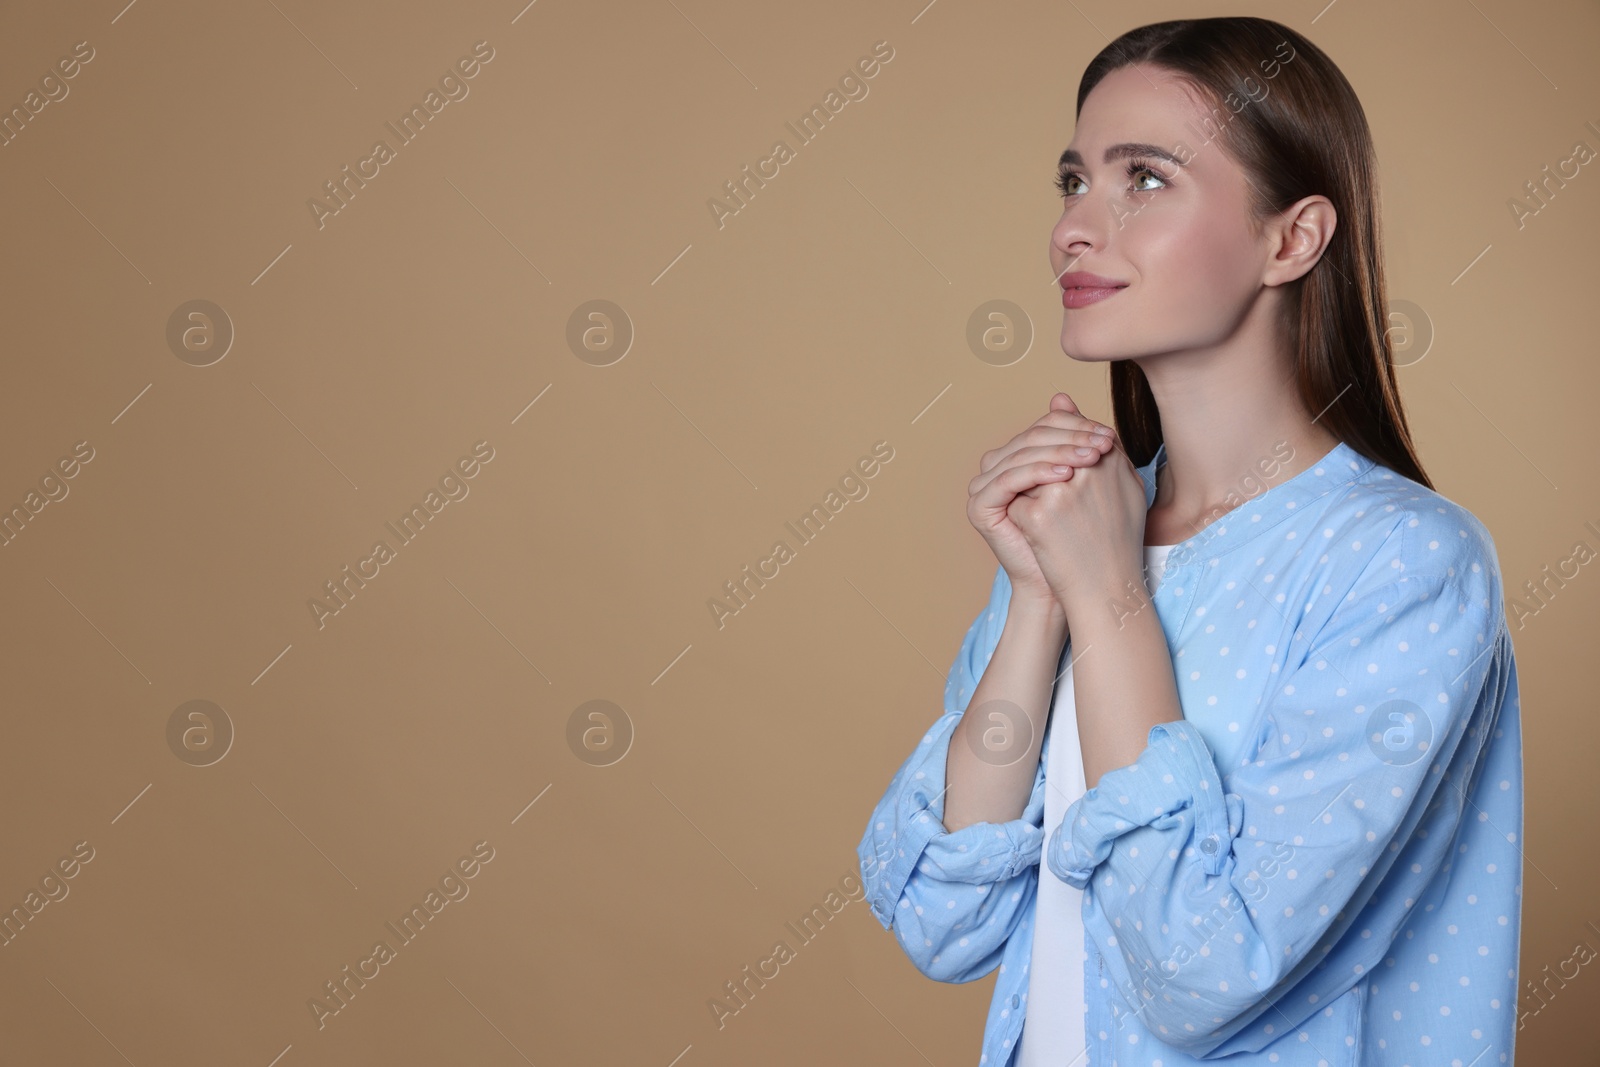 Photo of Woman with clasped hands praying on beige background, space for text